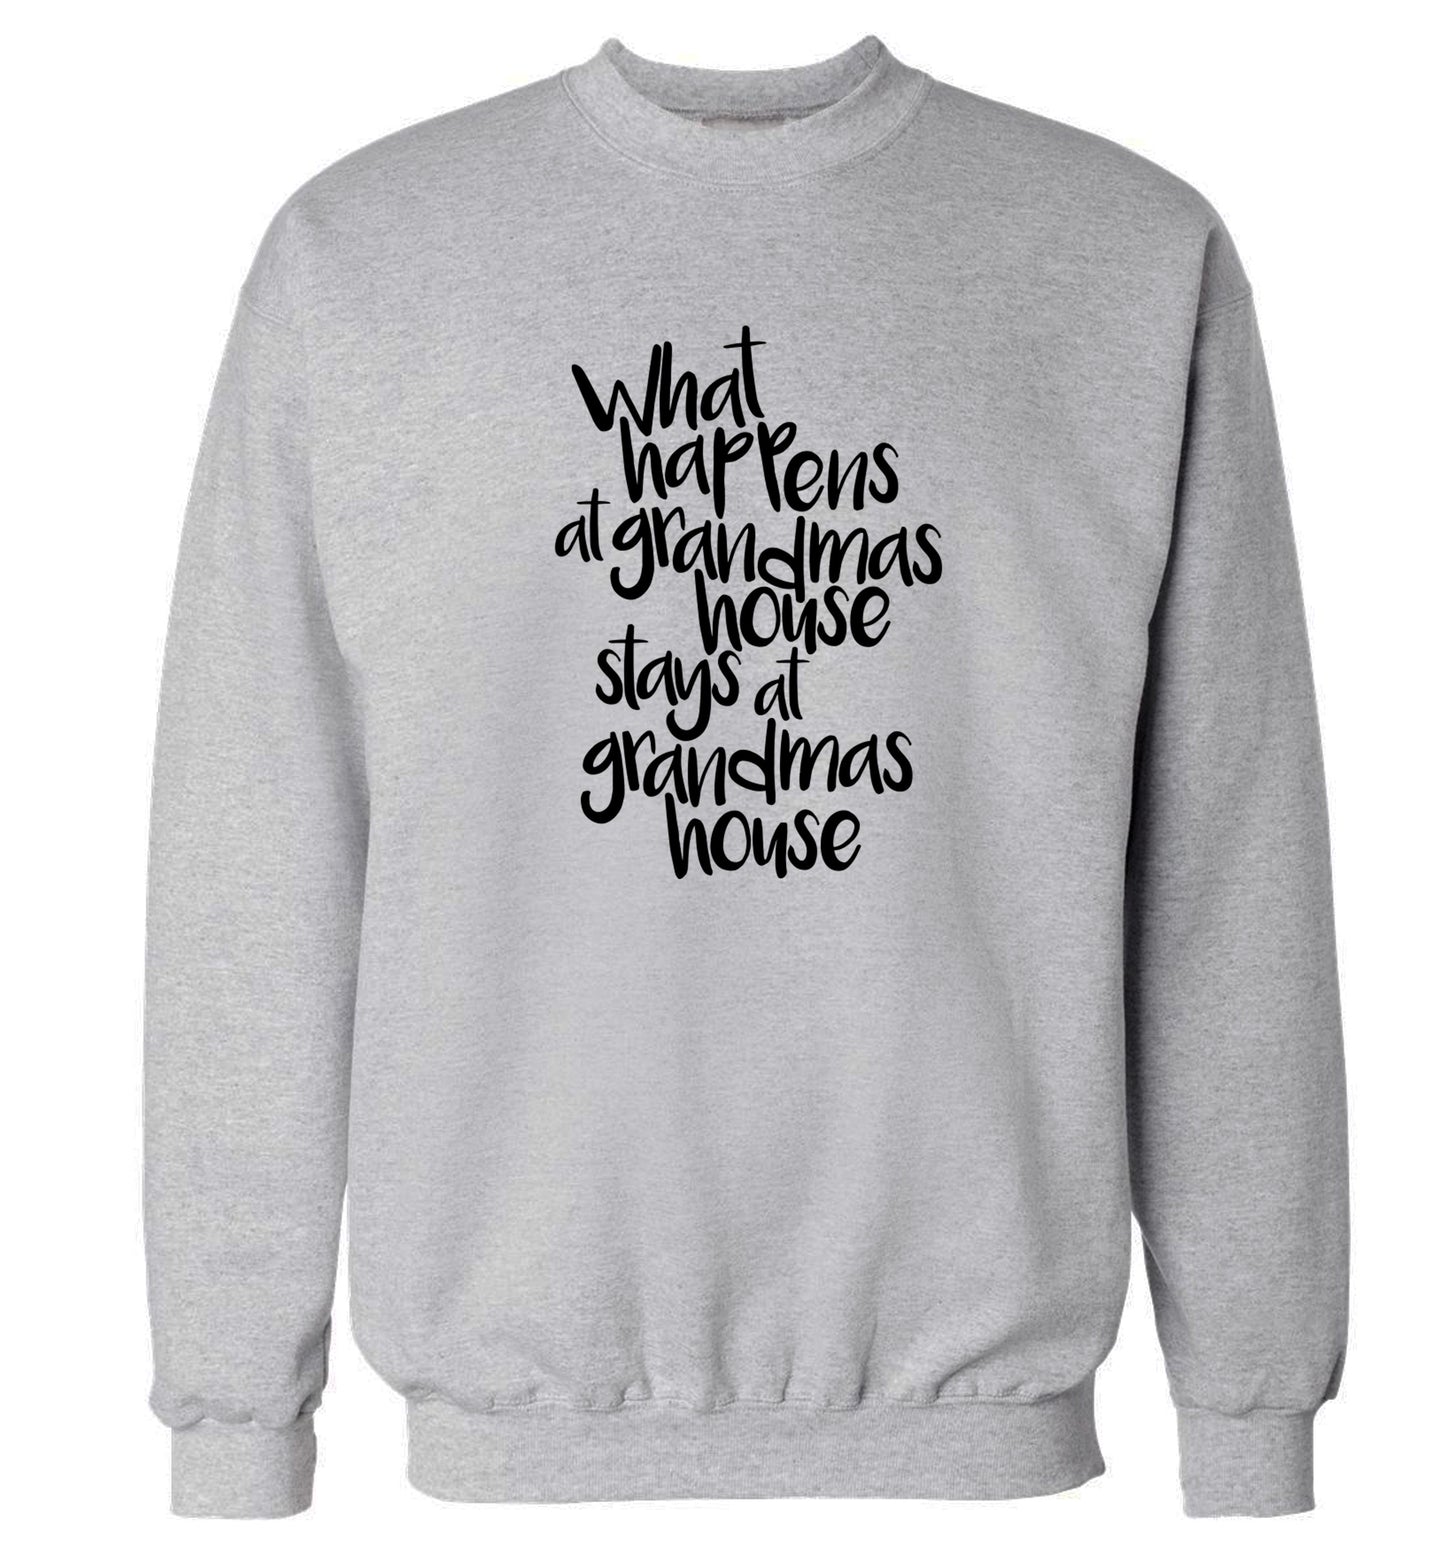 What happens at grandmas house stays at grandmas house Adult's unisex grey Sweater 2XL